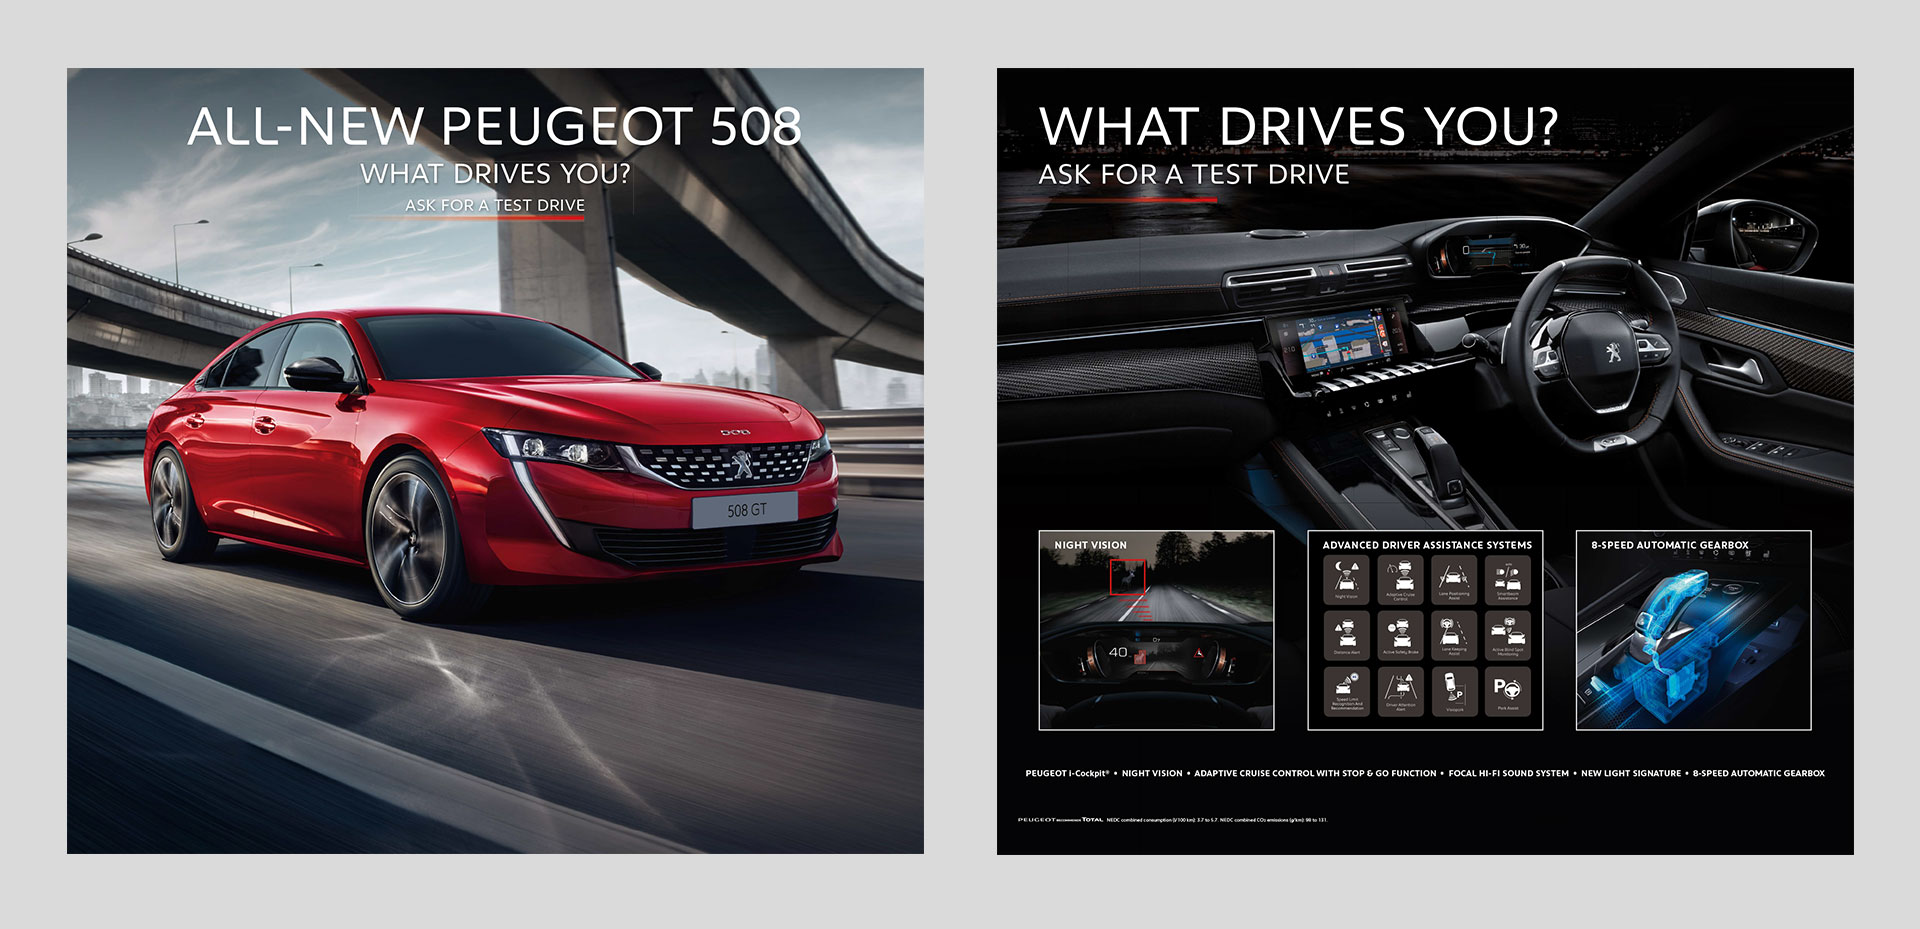 Peugeot Dealer Marketing Launch of the All-New PEUGEOT 508